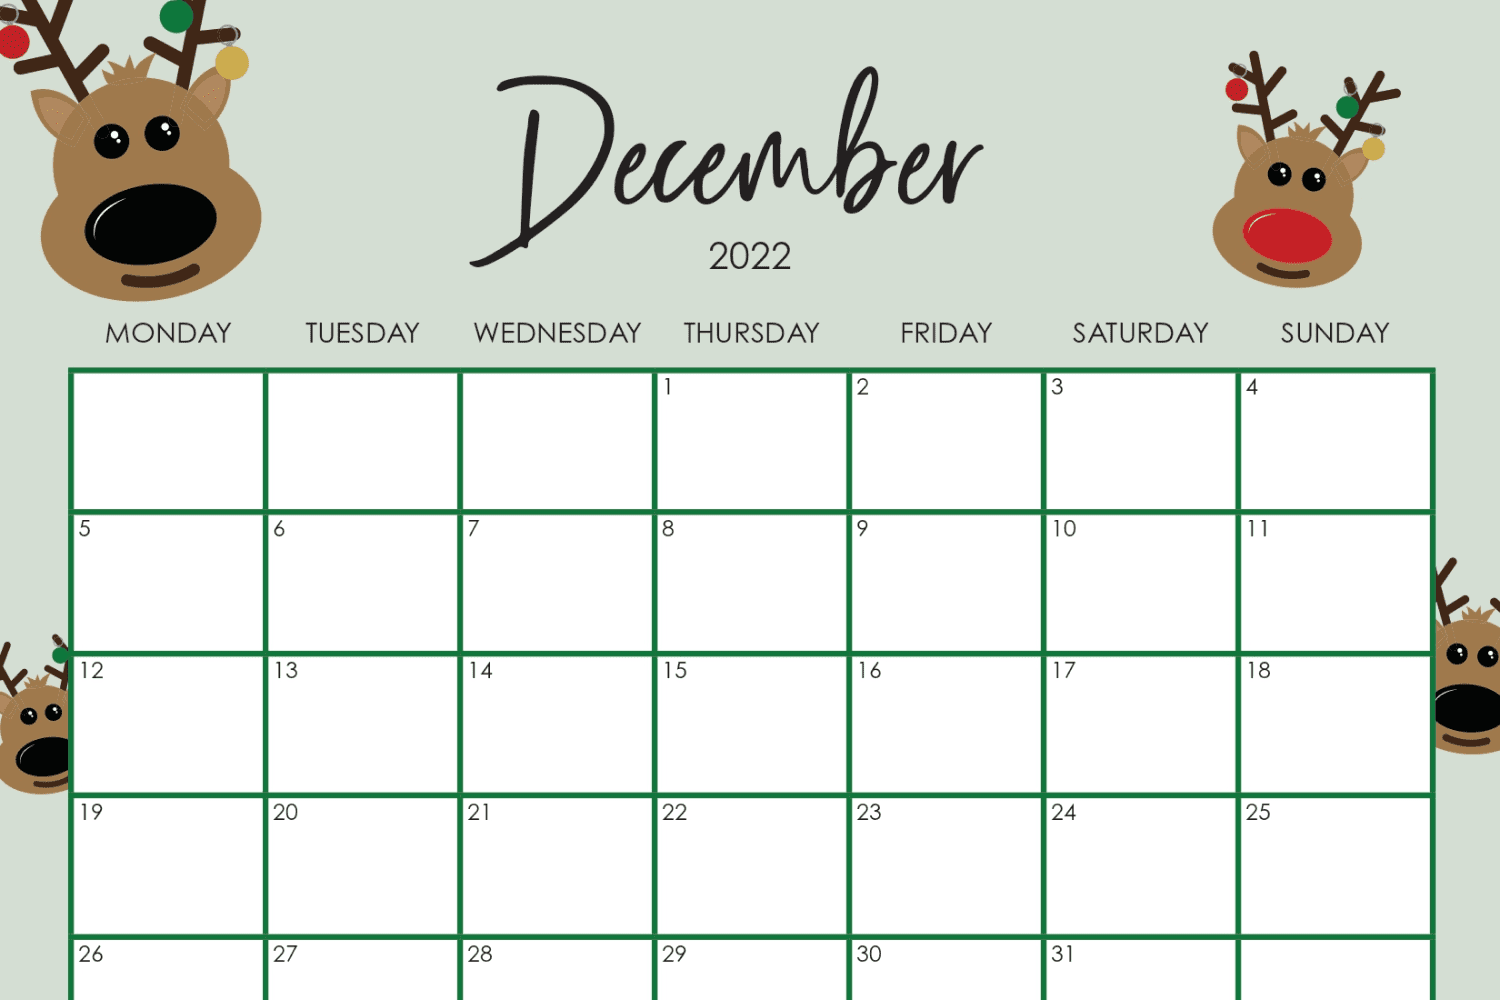 December calendar with the green background and deer.